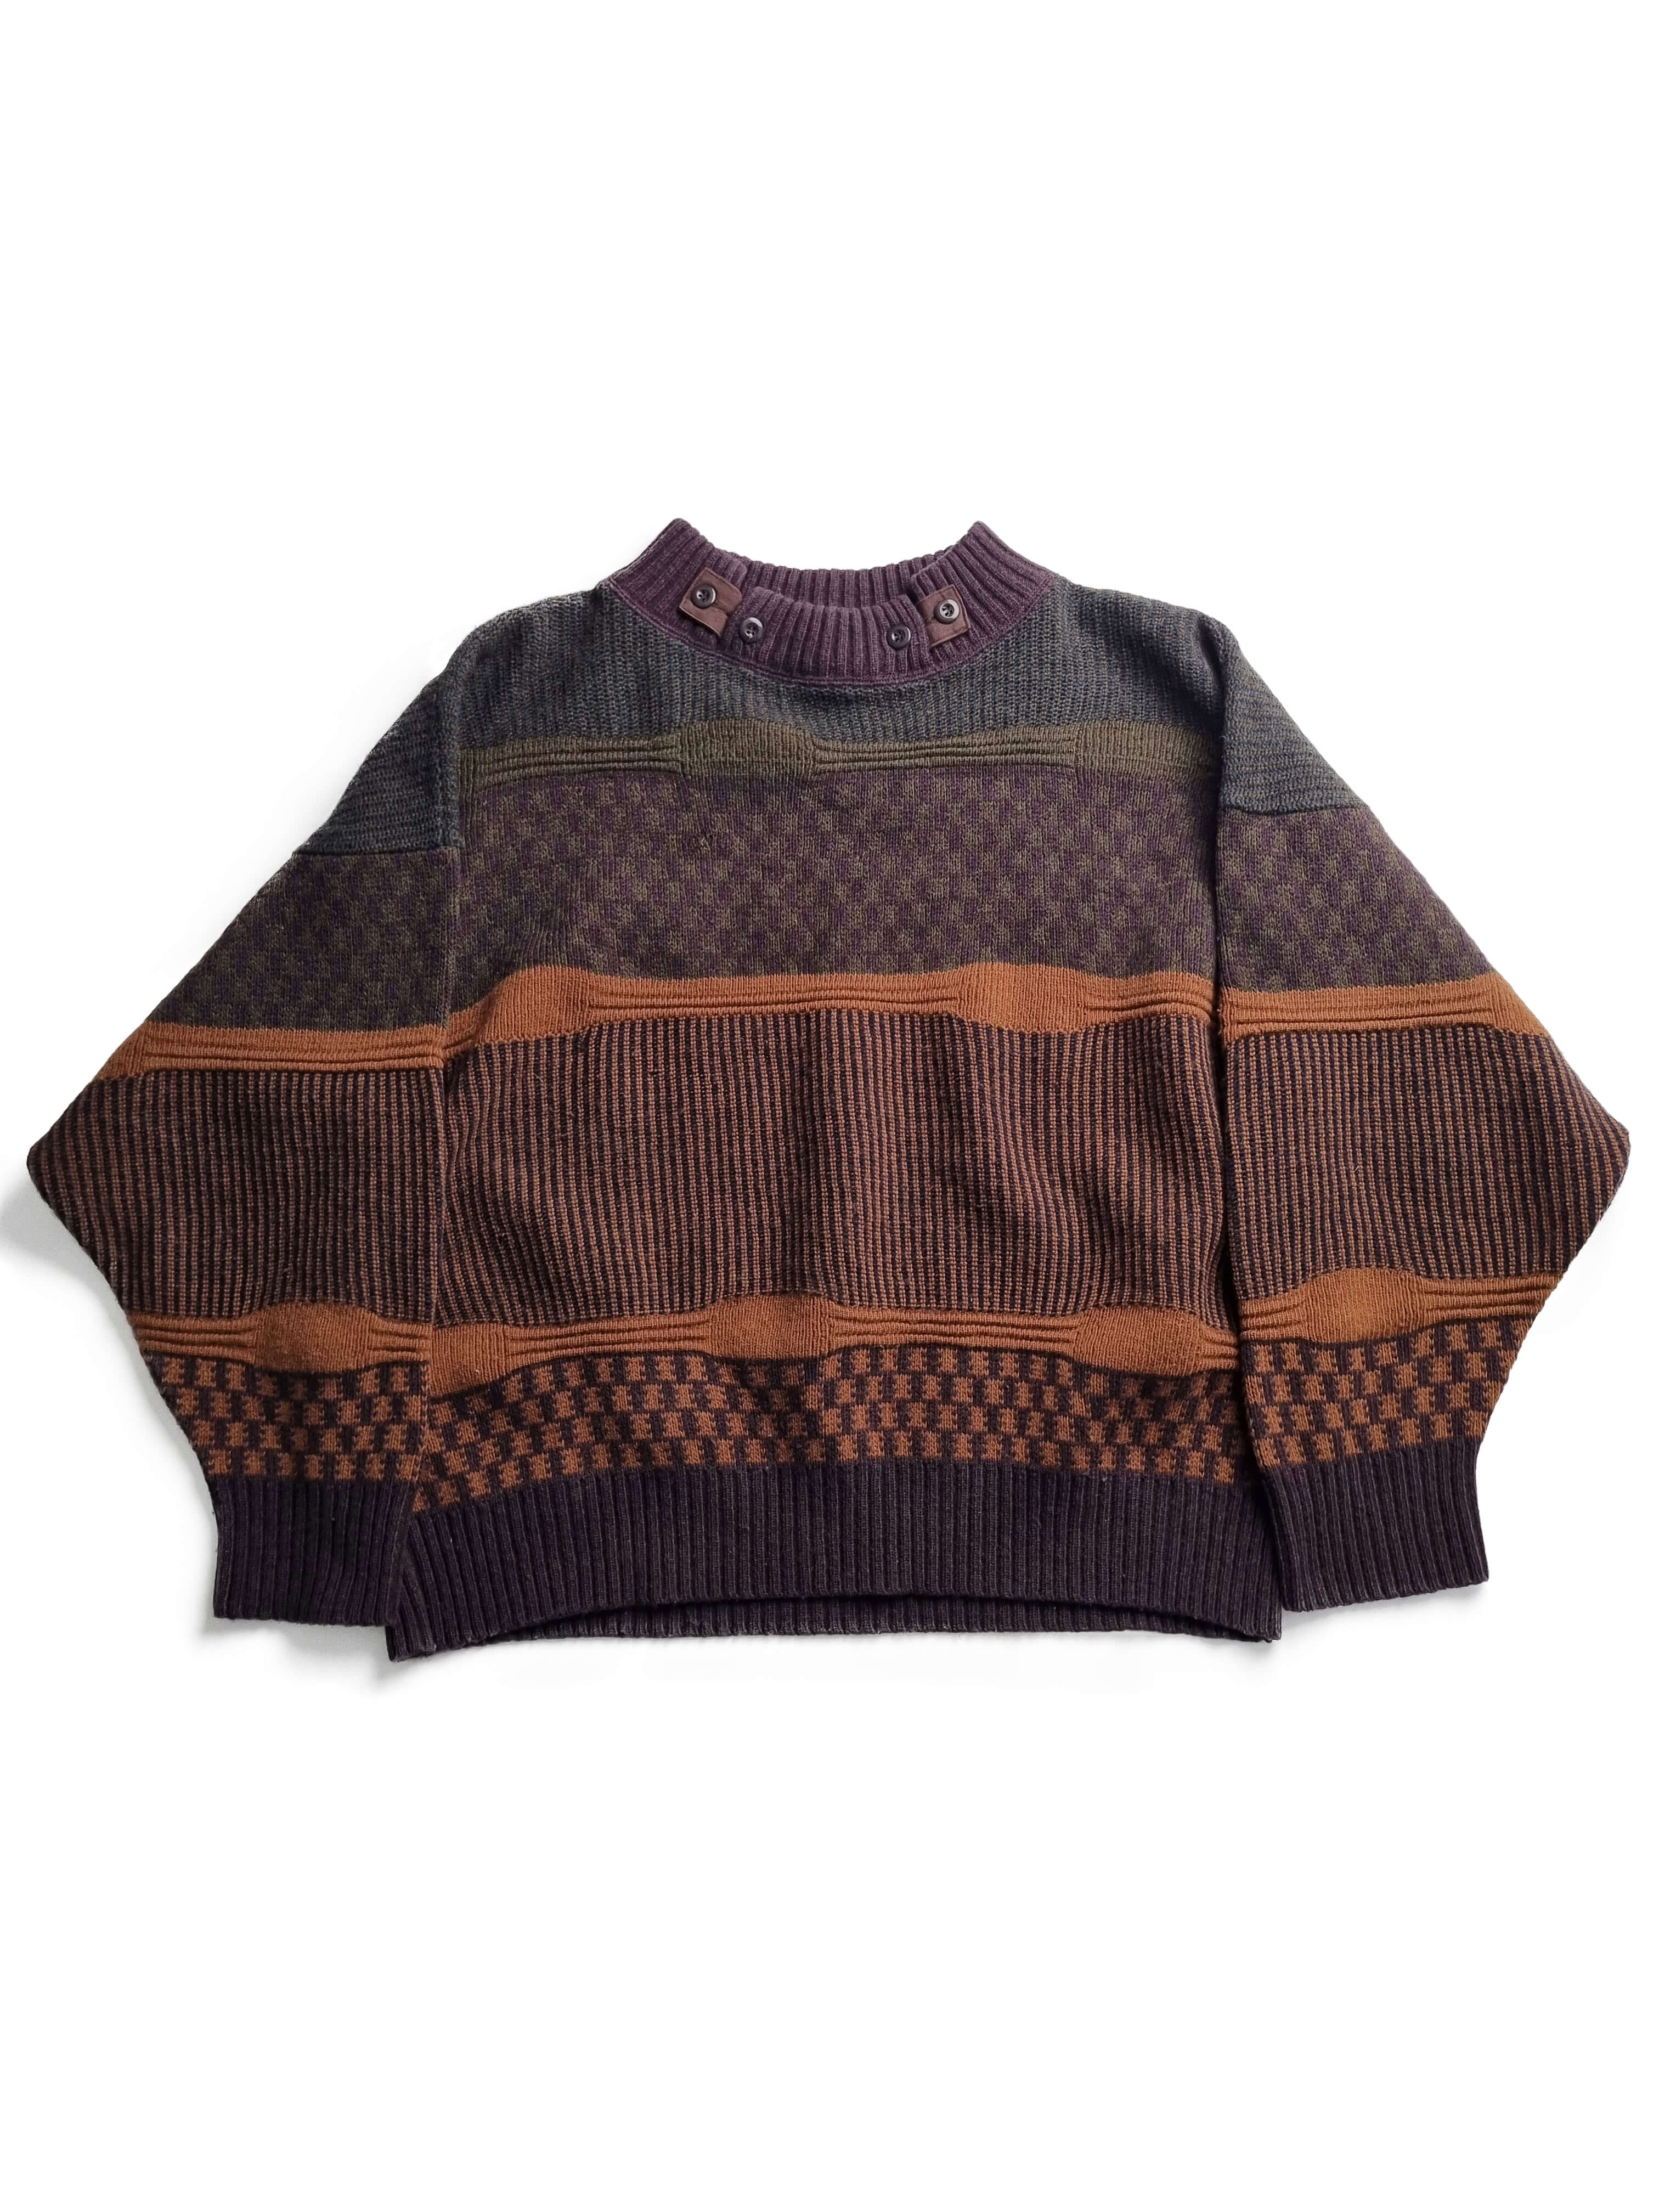 MARITHE FRANCOIS GIRBAUD x MAILLAPARTY 80s sweater